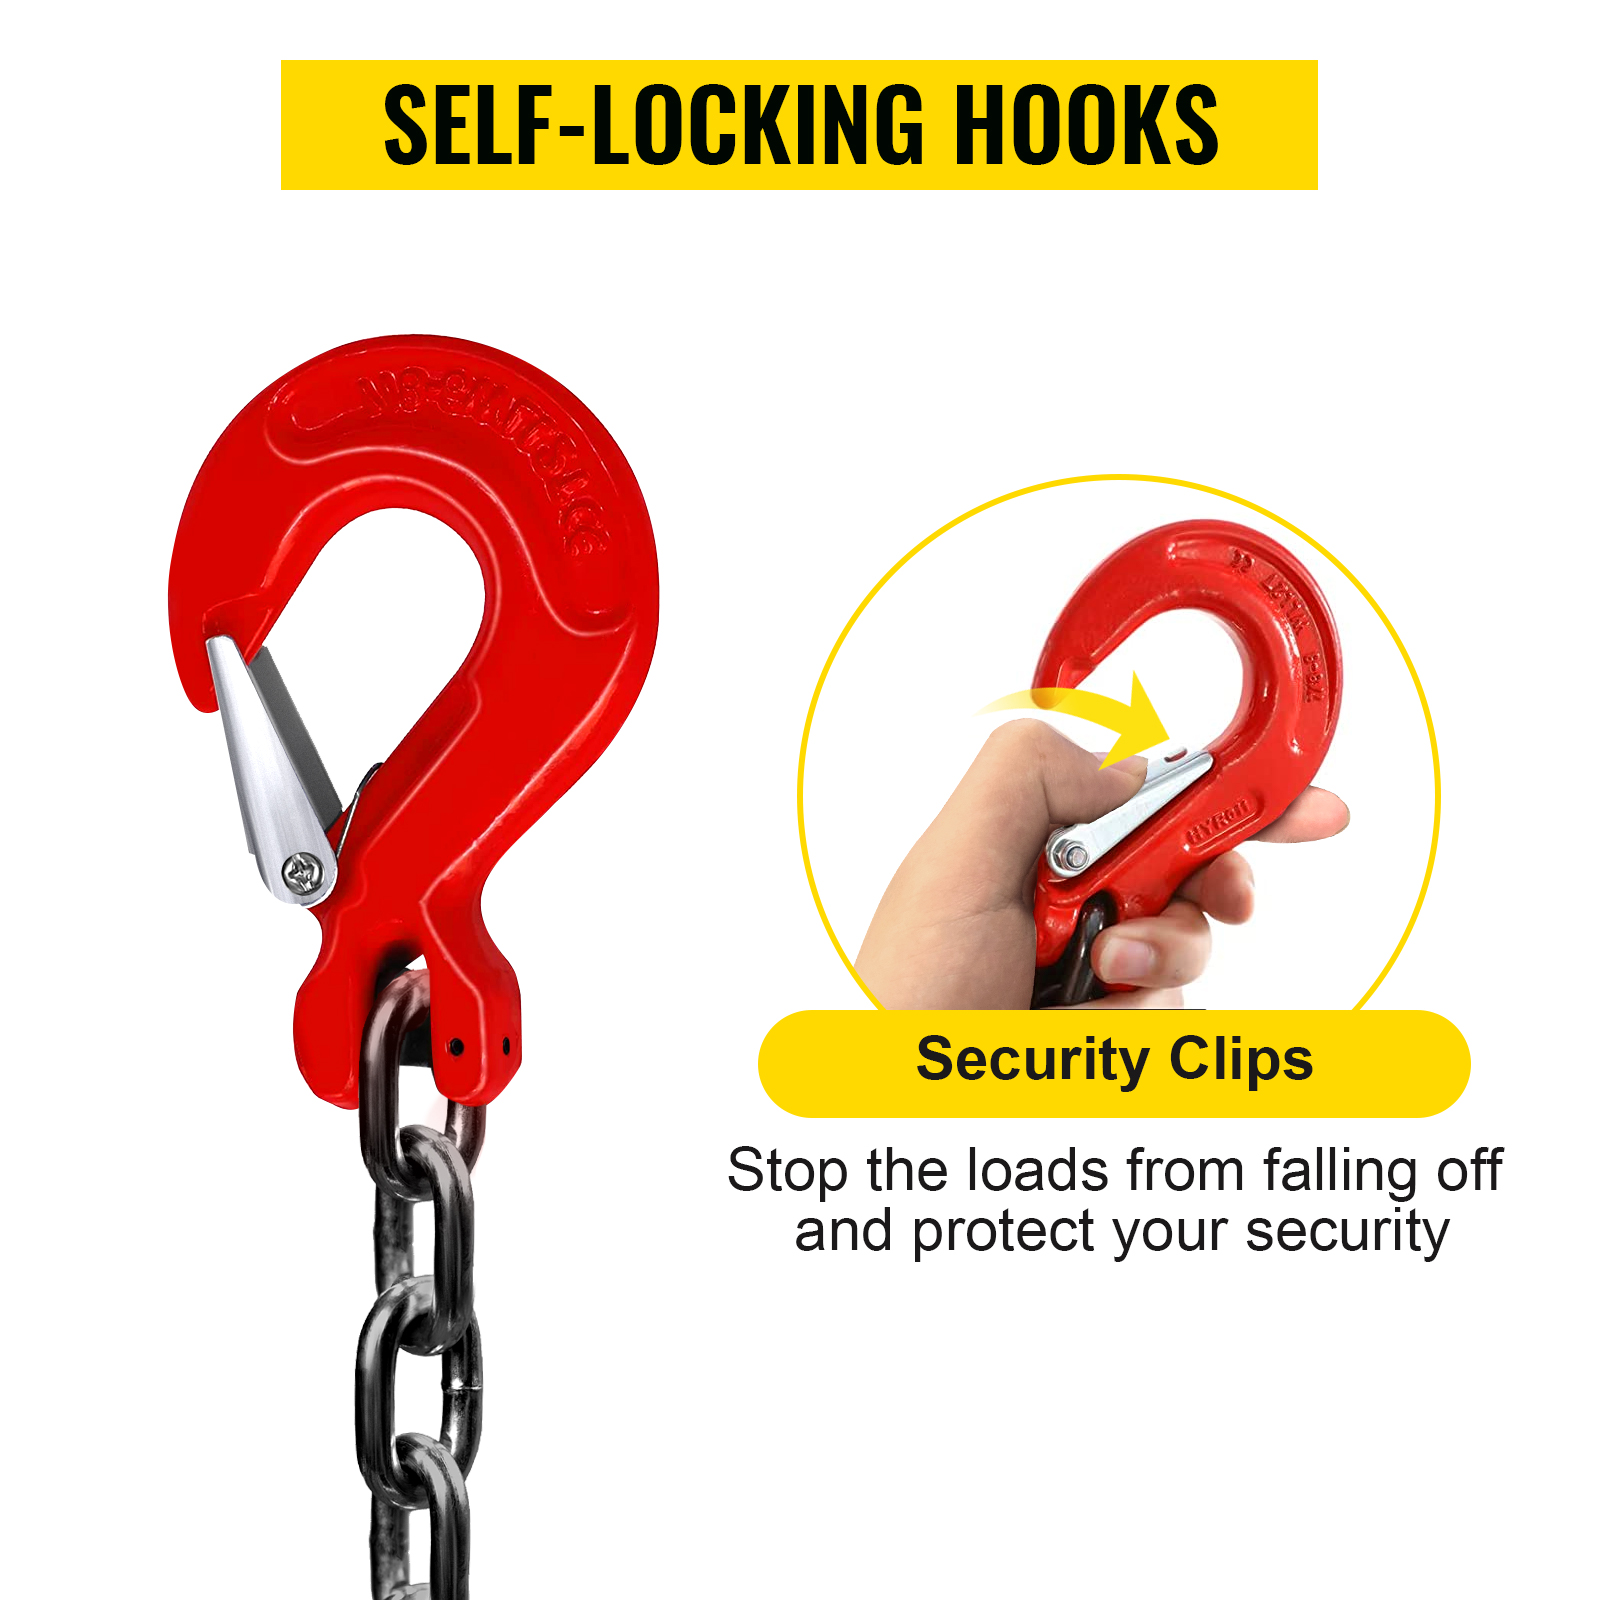 5-Ton G80 Heavy-Duty Self-Locking Swivel Hook for Hoisting and Rigging